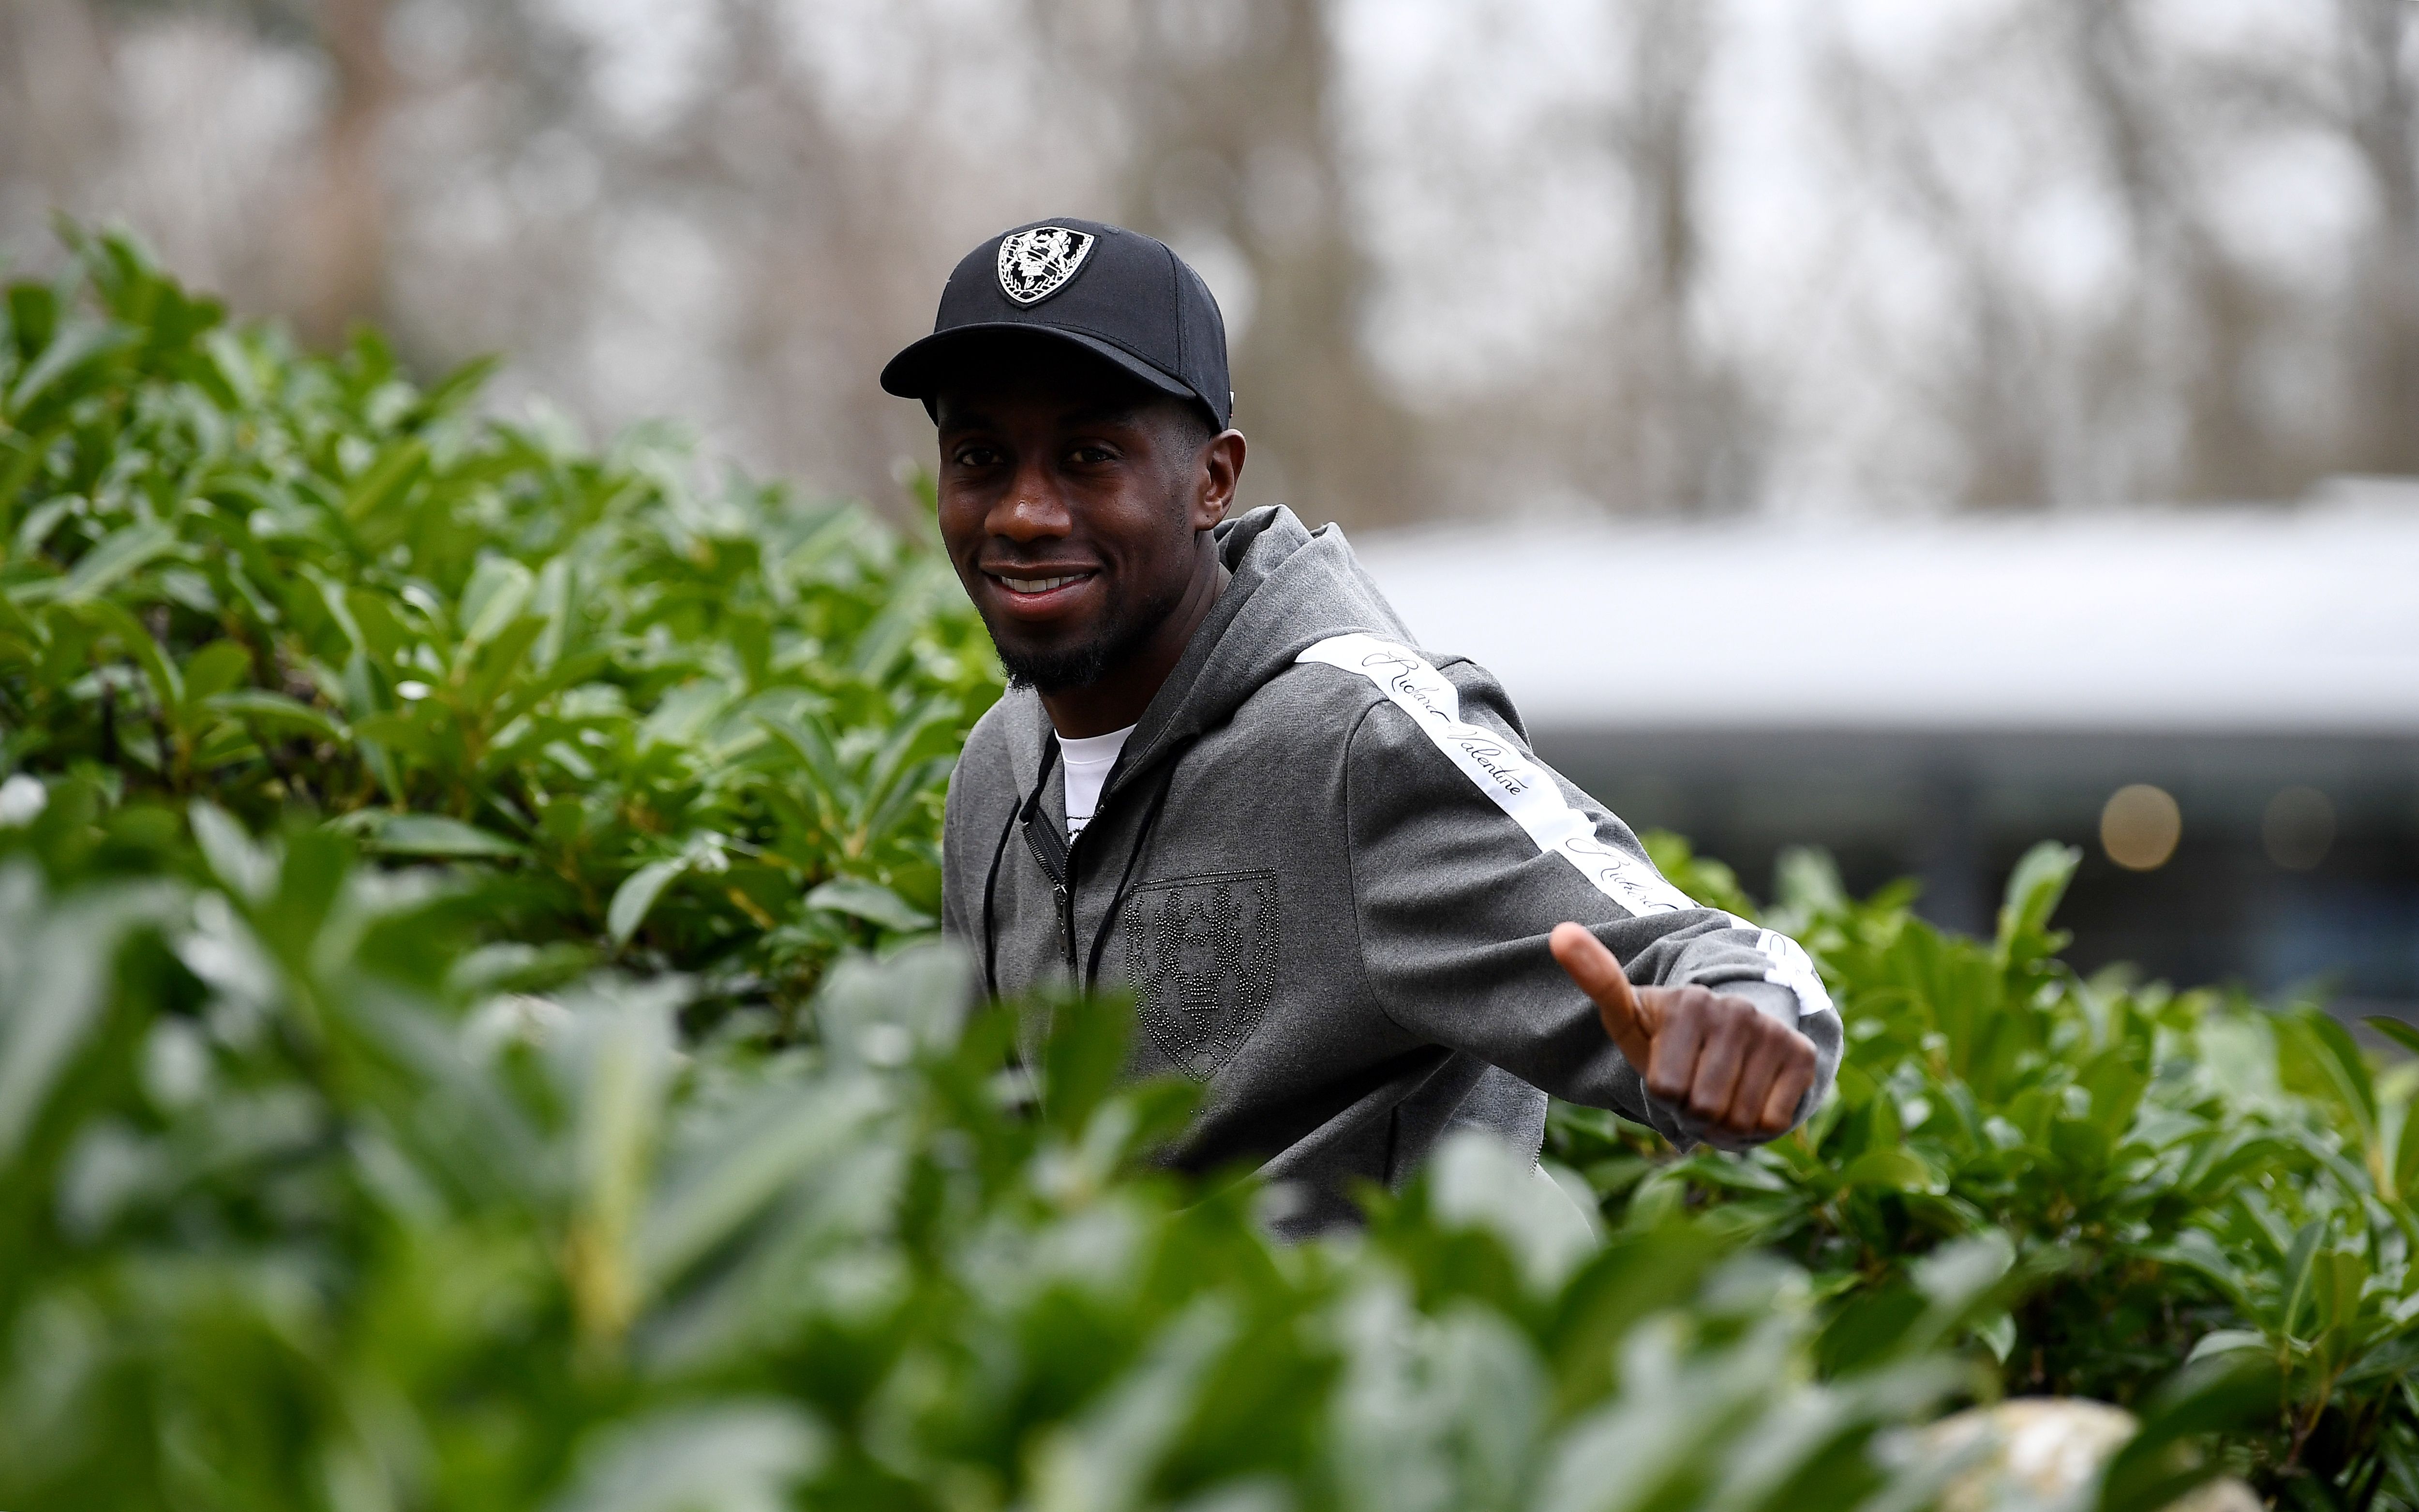 France's midfielder Blaise Matuidi arrives at the French national football team training base in Clairefontaine-en-Yvelines on March 18, 2019, as part of the team's preparation for the upcoming qualification Euro-2020 football matches against Moldavia and Island. (Photo by FRANCK FIFE / AFP)        (Photo credit should read FRANCK FIFE/AFP/Getty Images)